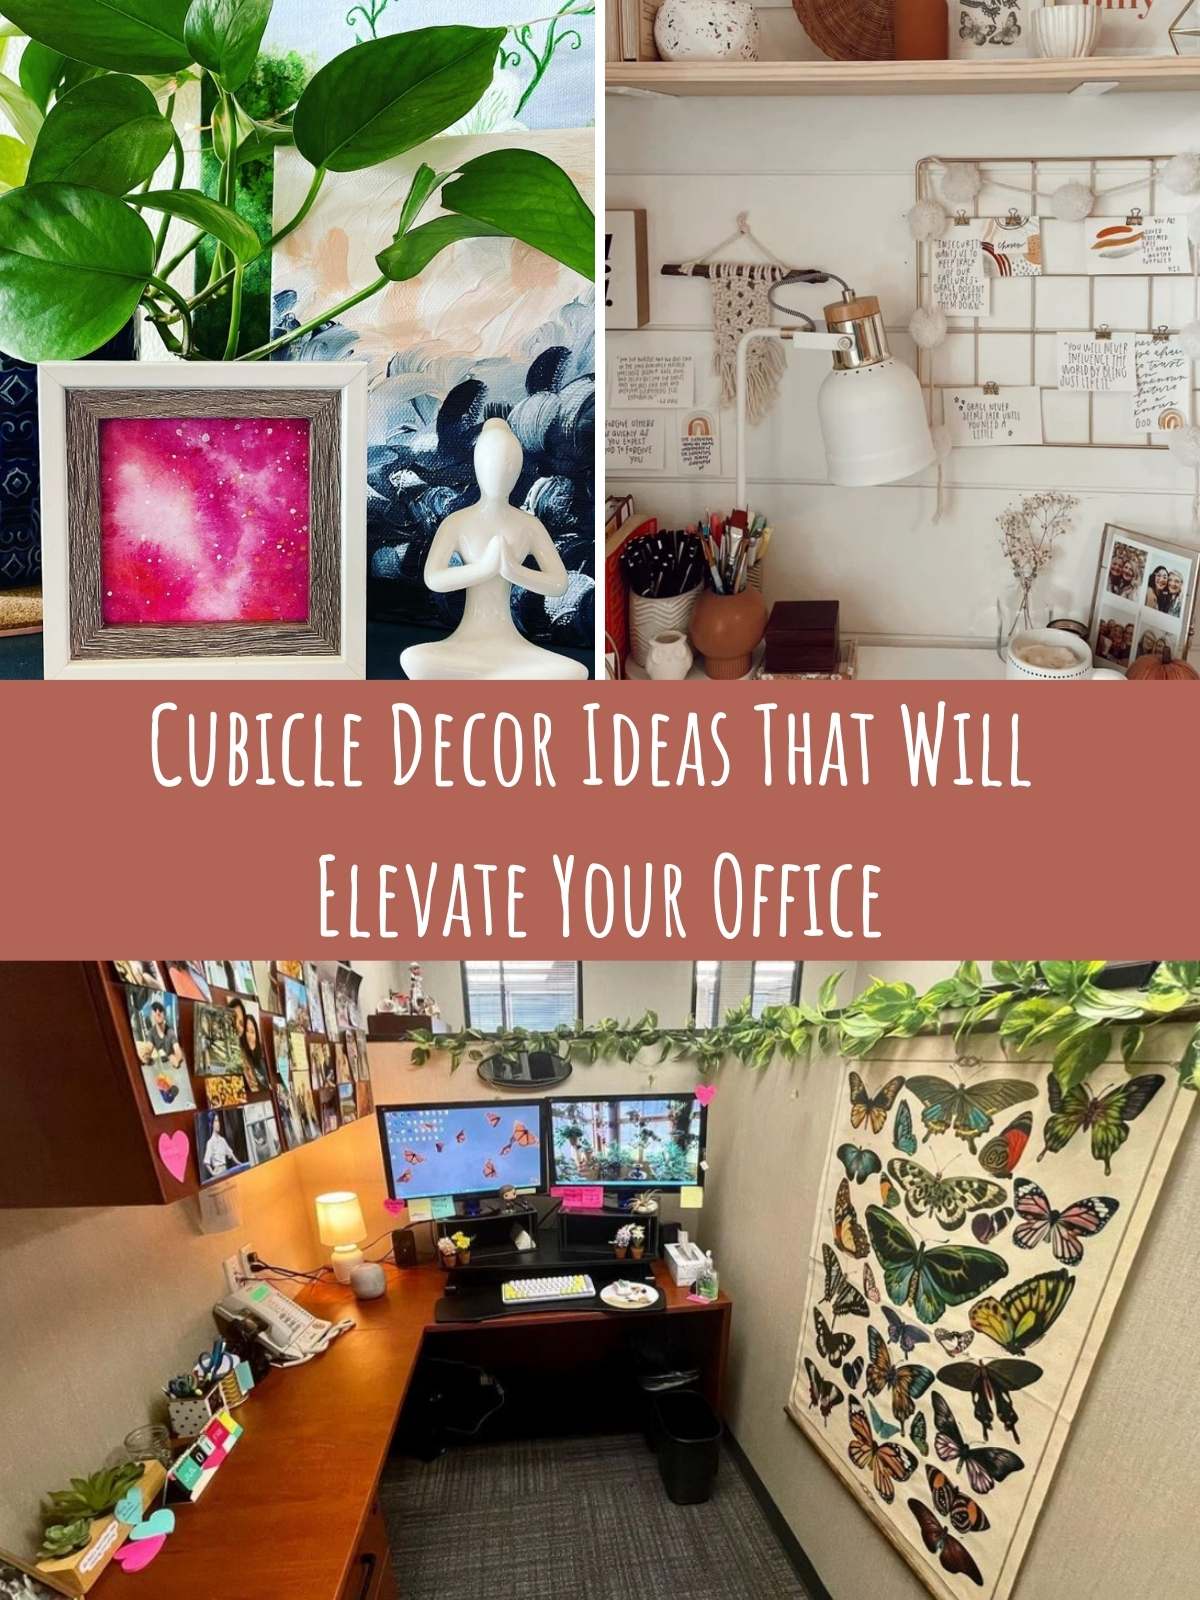 Cubicle Decor Ideas that will elevate your office. 3 different photo examples.